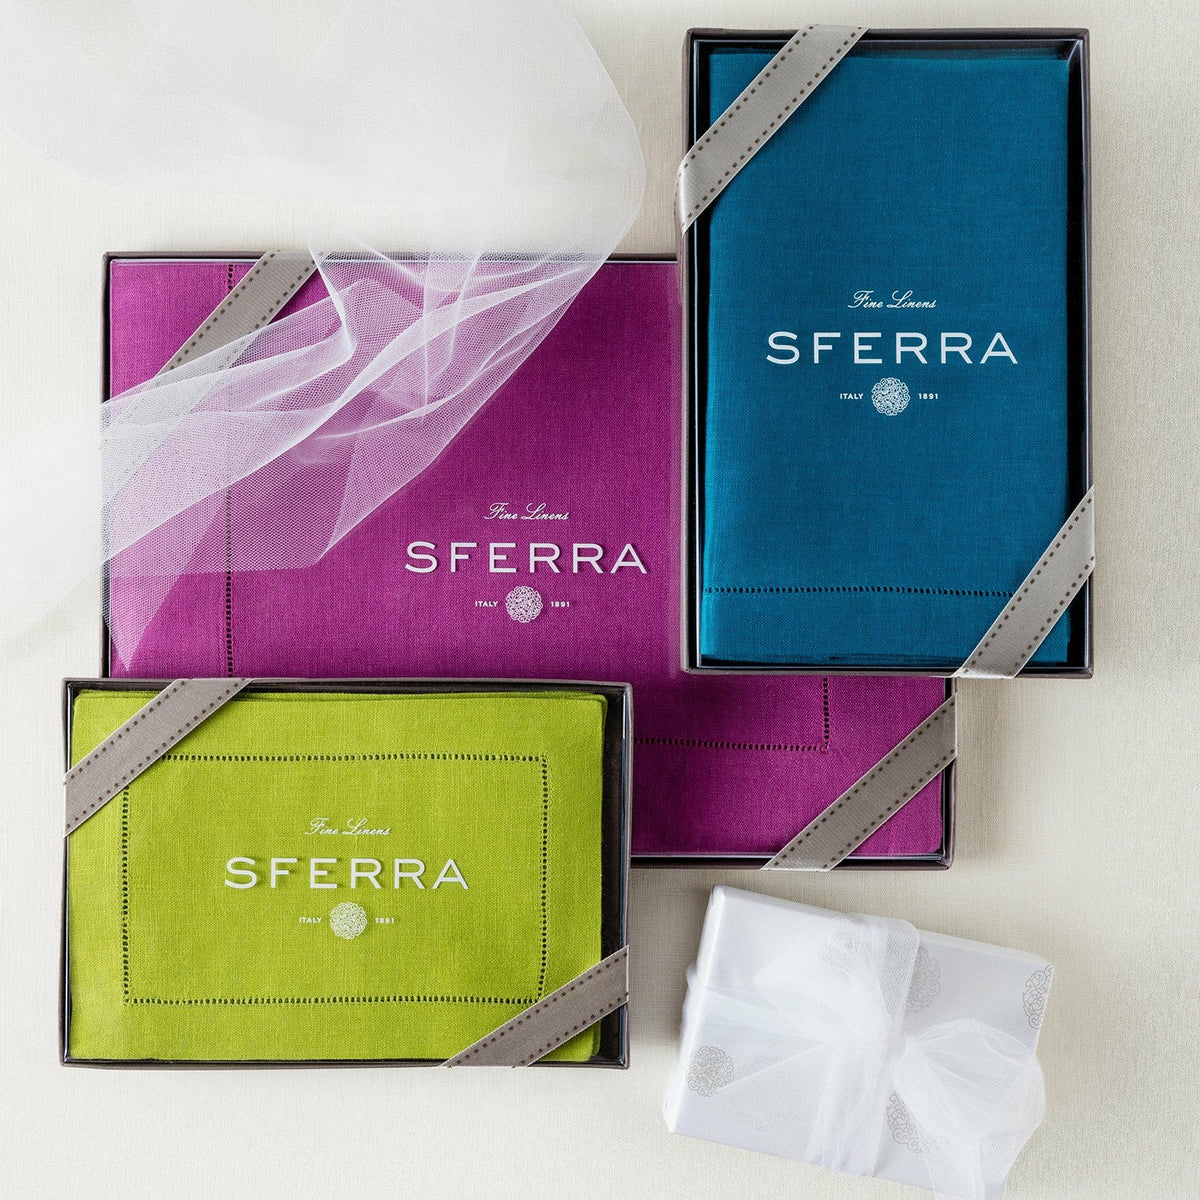 Sferra Table Linens Gift Boxes